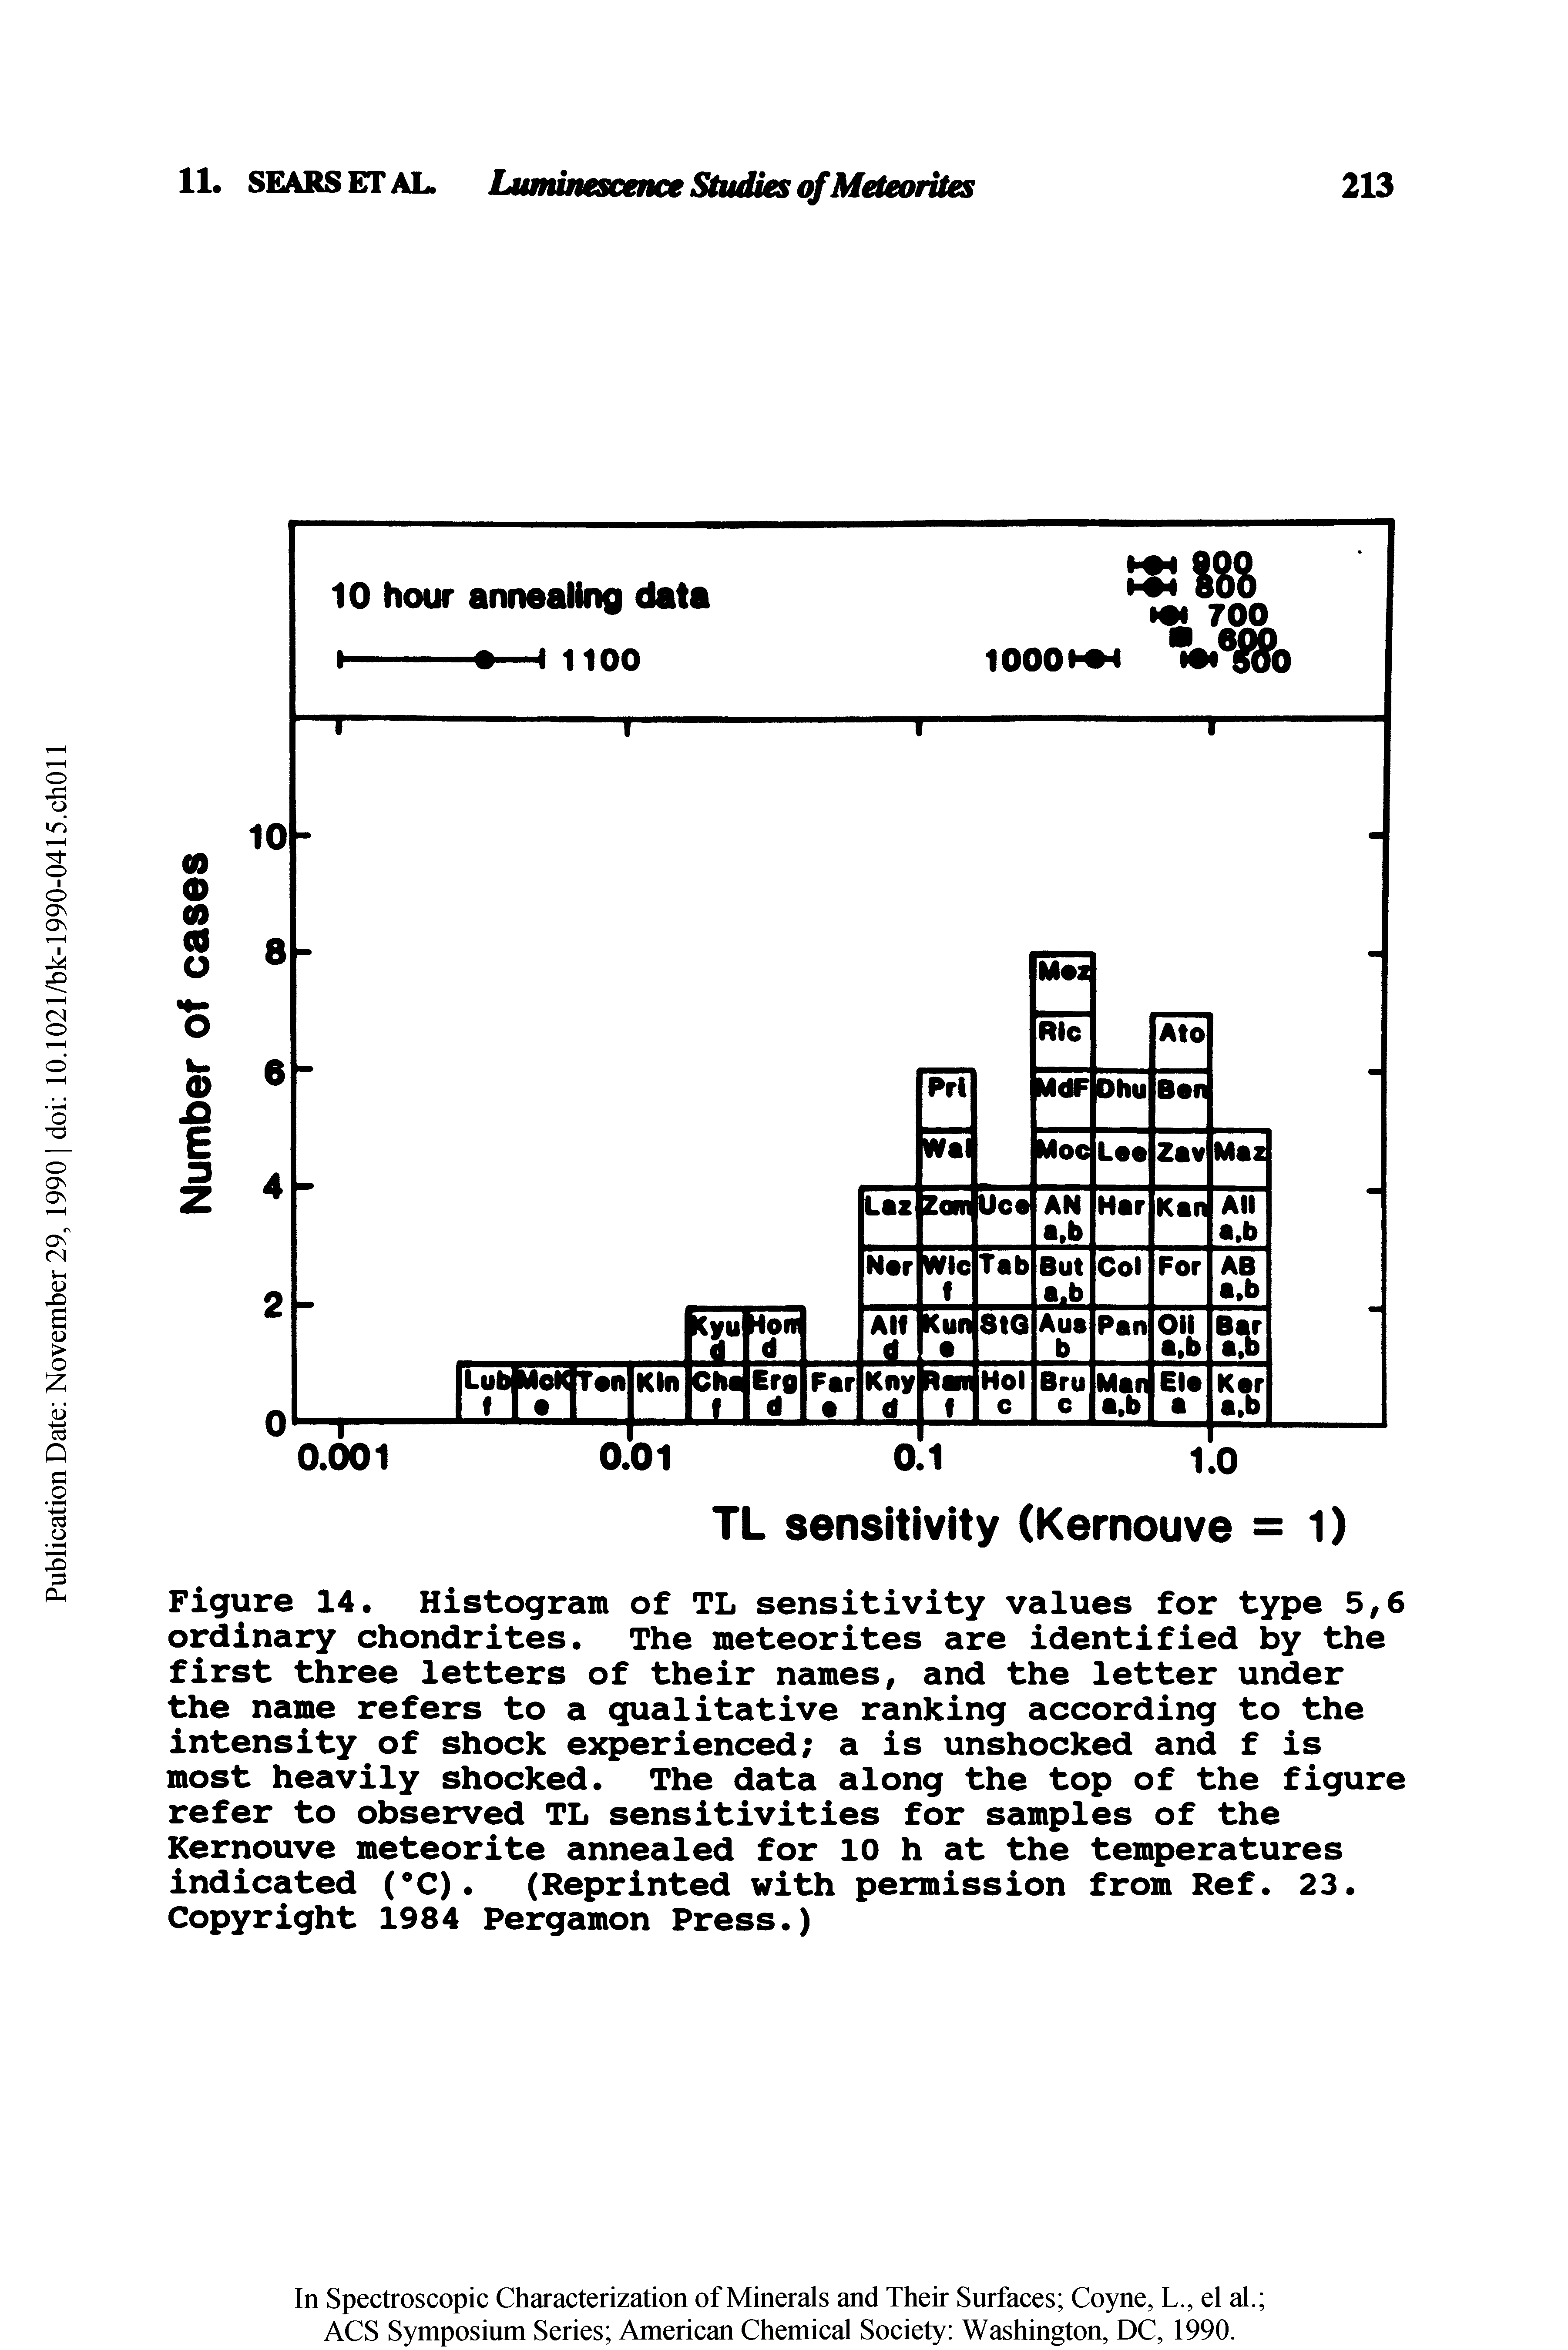 Figure 14. Histogram of TL sensitivity values for type 5,6 ordinary chondrites. The meteorites are identified by the first three letters of their names, and the letter under the name refers to a qualitative ranking according to the intensity of shock experienced a is unshocked and f is most heavily shocked. The data along the top of the figure refer to observed TL sensitivities for samples of the Kernouve meteorite annealed for 10 h at the temperatures indicated (°C). (Reprinted with permission from Ref. 23. Copyright 1984 Pergamon Press.)...